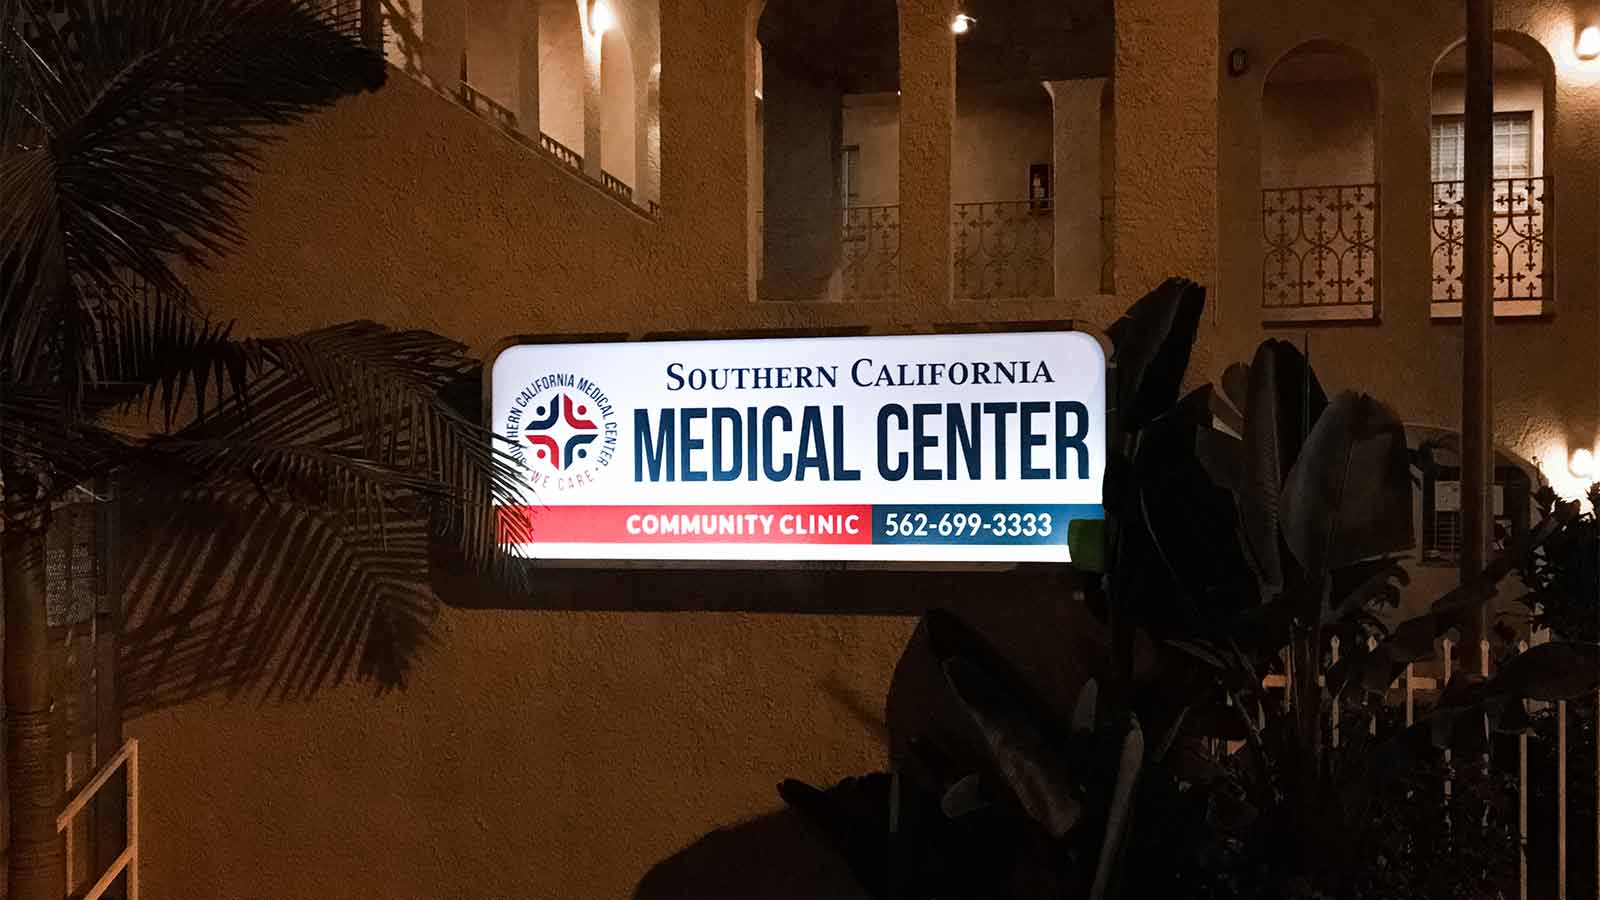 southern california medical center lighted sign